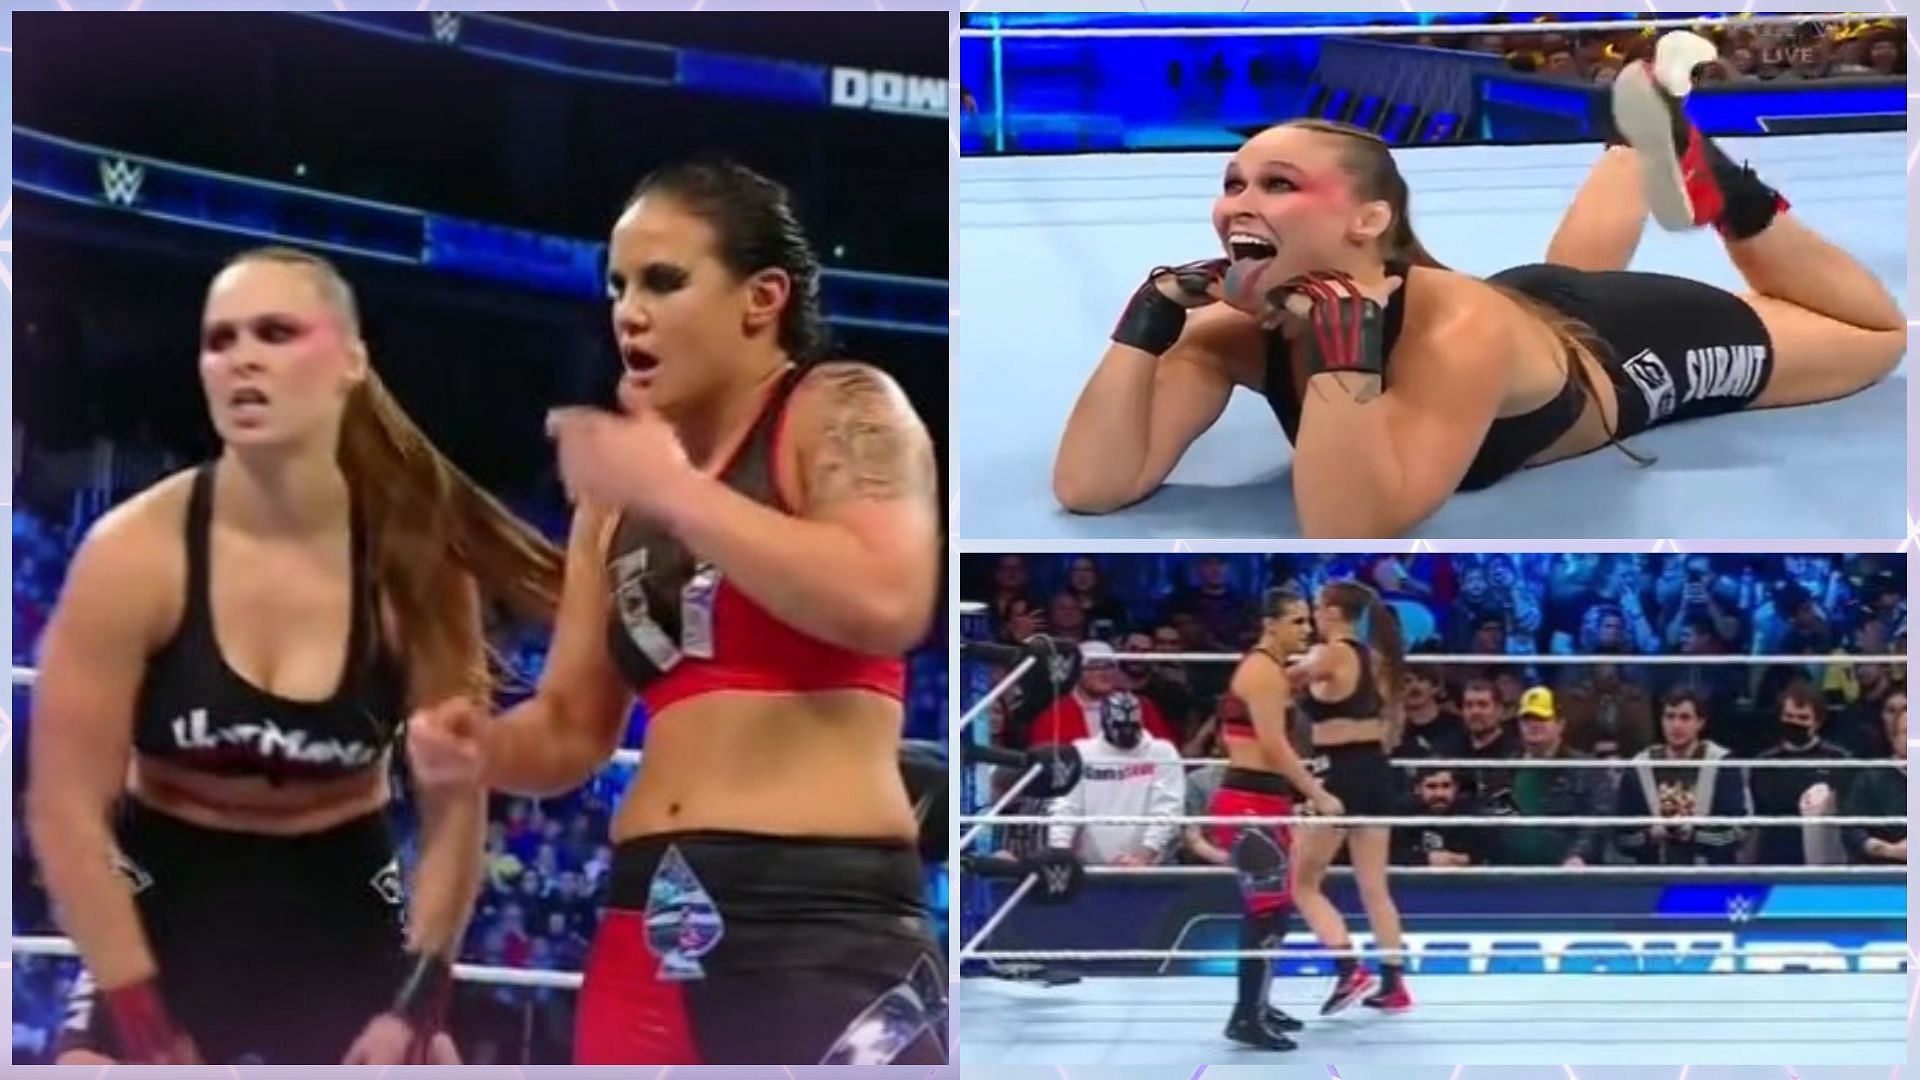 Ronda Rousey is the SmackDown Women